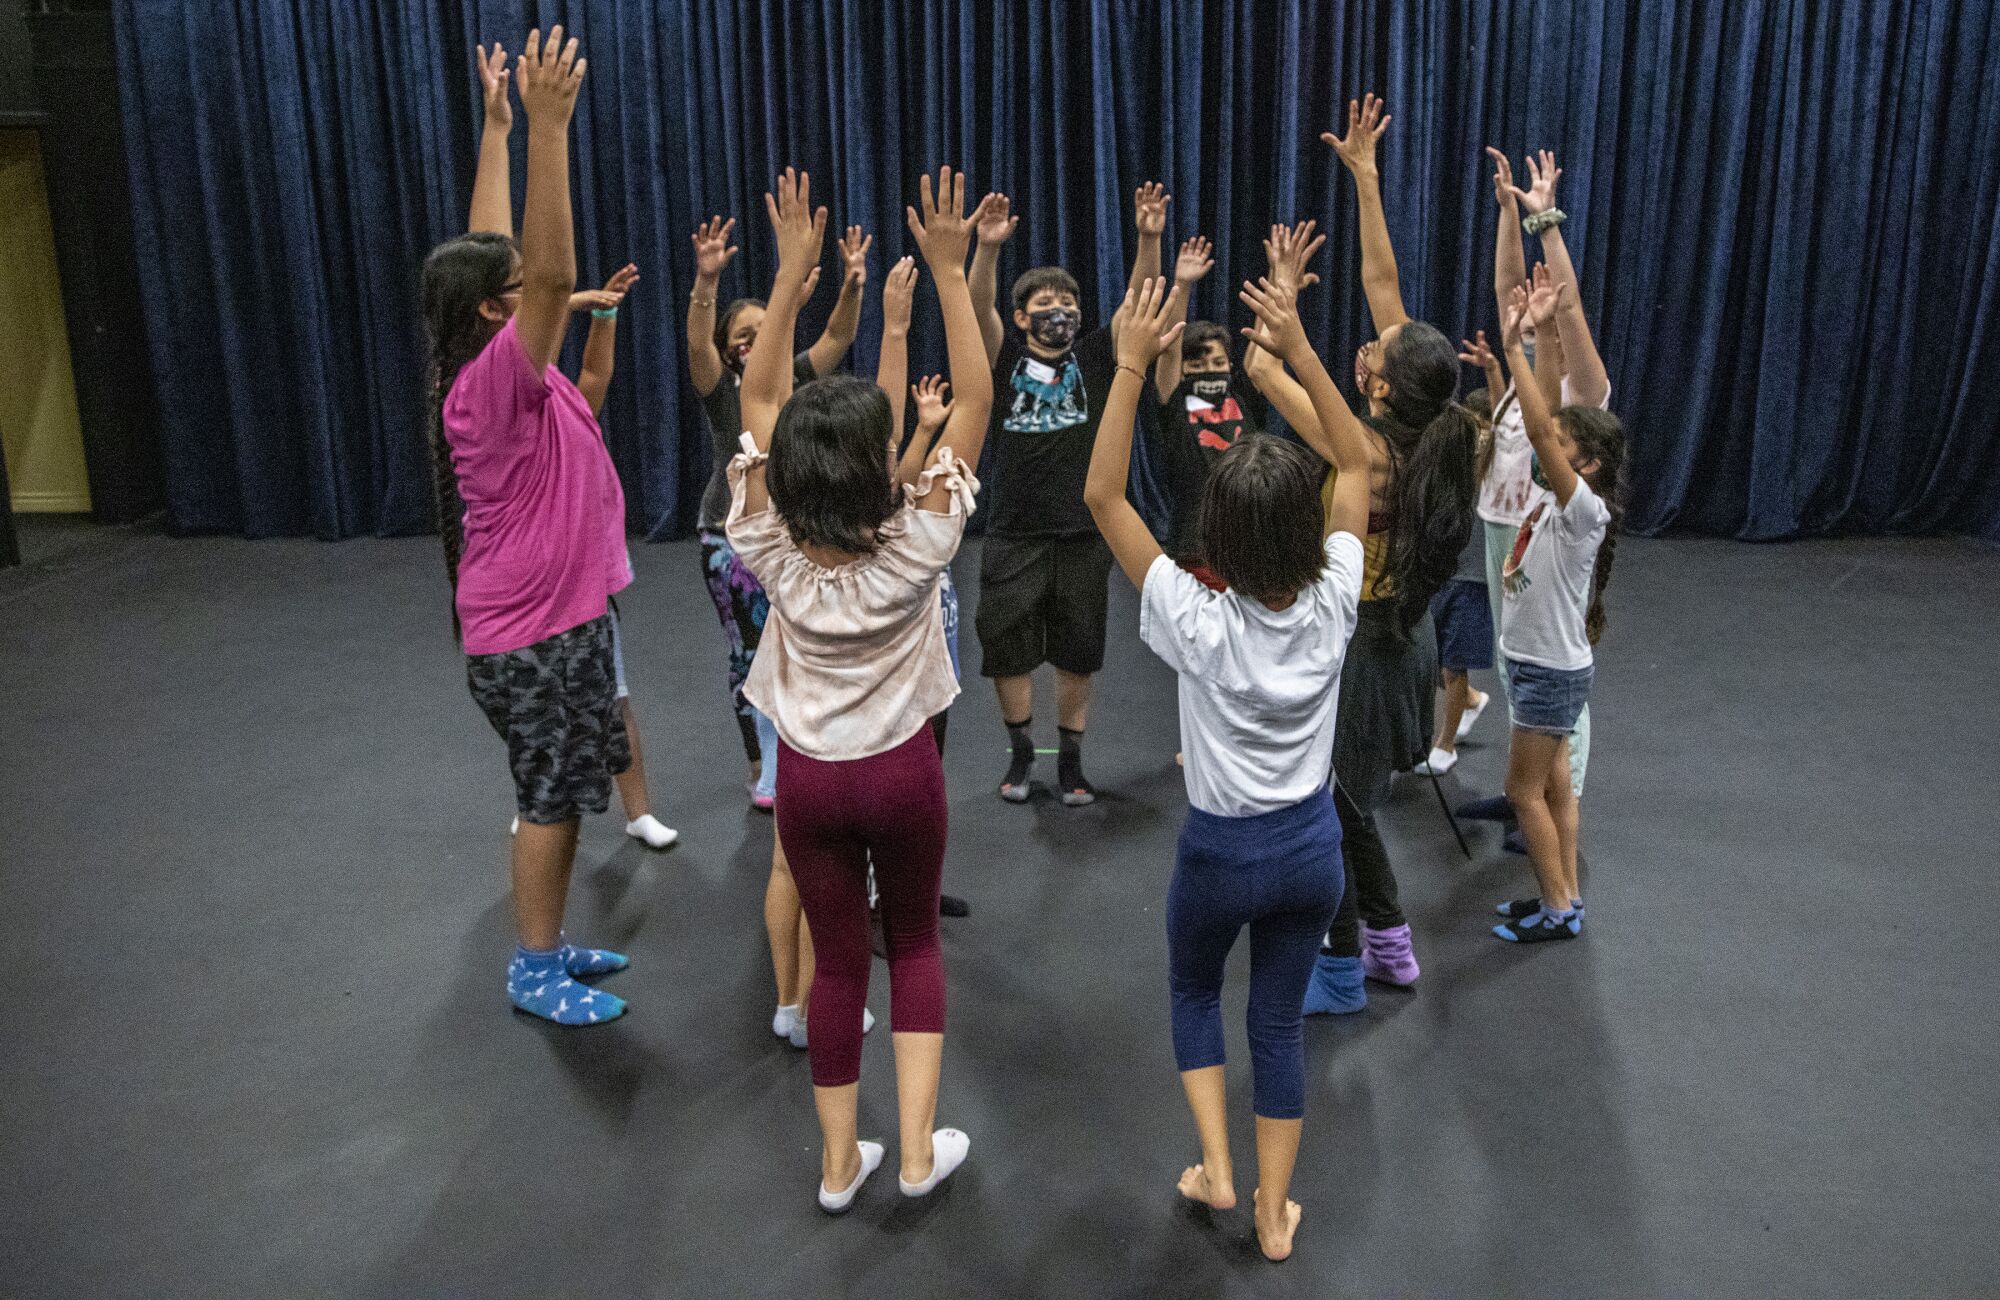 Students dance during weekend classes at Casa 0101 Saturday, July 31, 2021 in Boyle Heights.